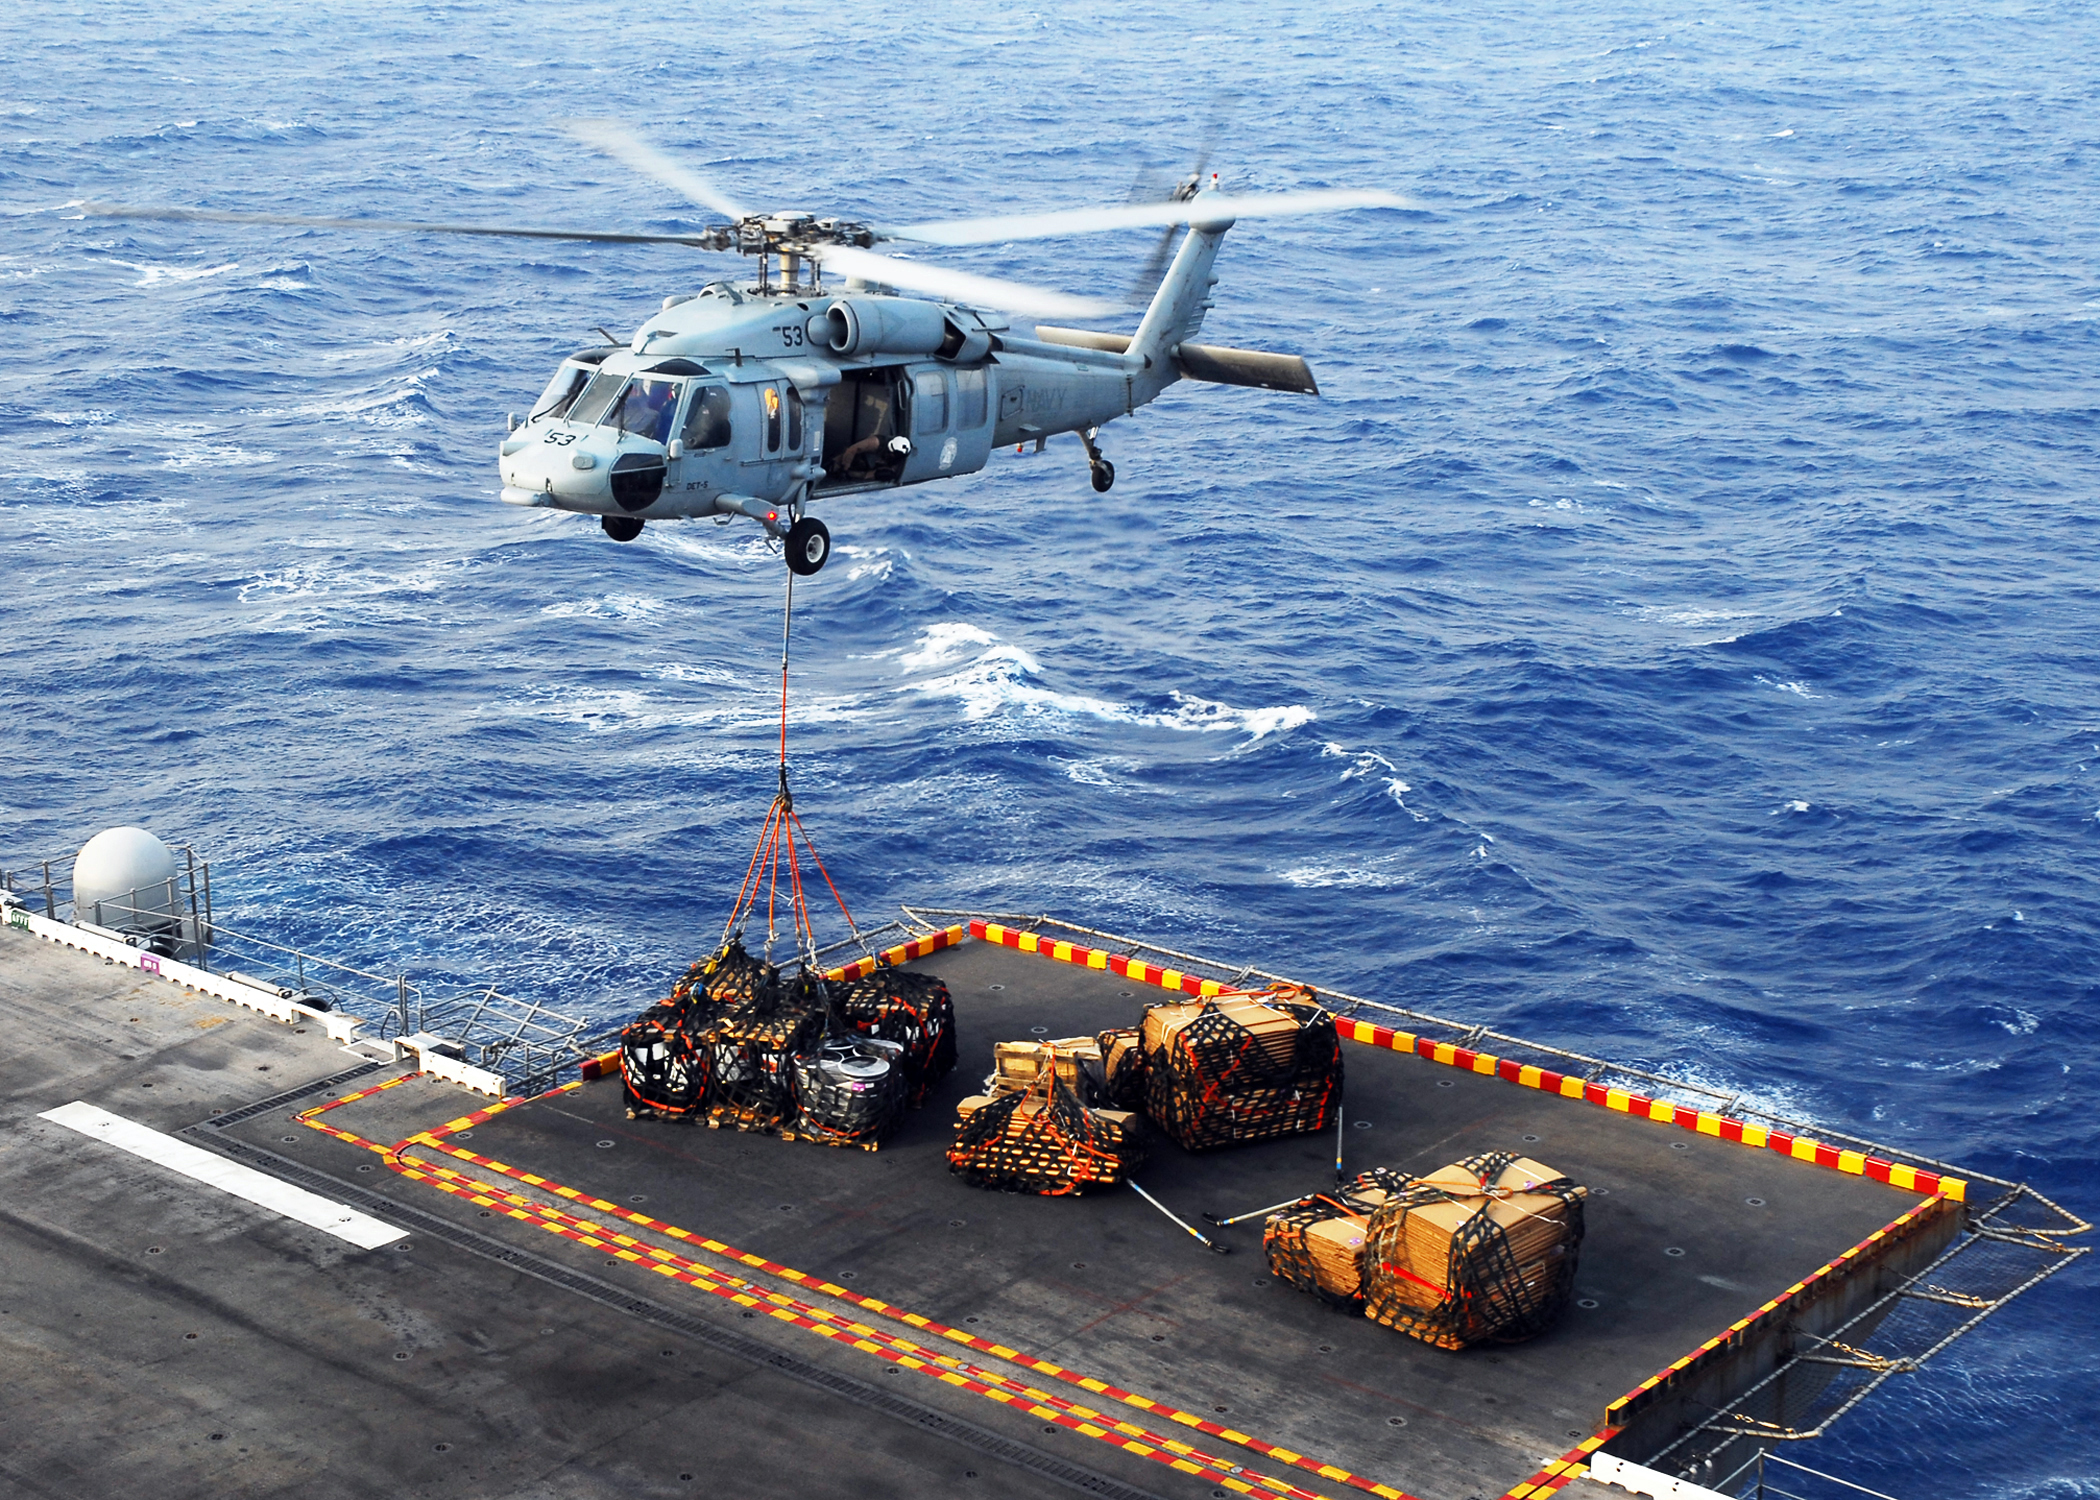 US Navy 080831-N-2183K-044 An MH-60S Sea Hawk helicopter delivers crates of supplies to the amphibious assault ship USS Peleliu (LHA 5) during a vertical replenishment at sea